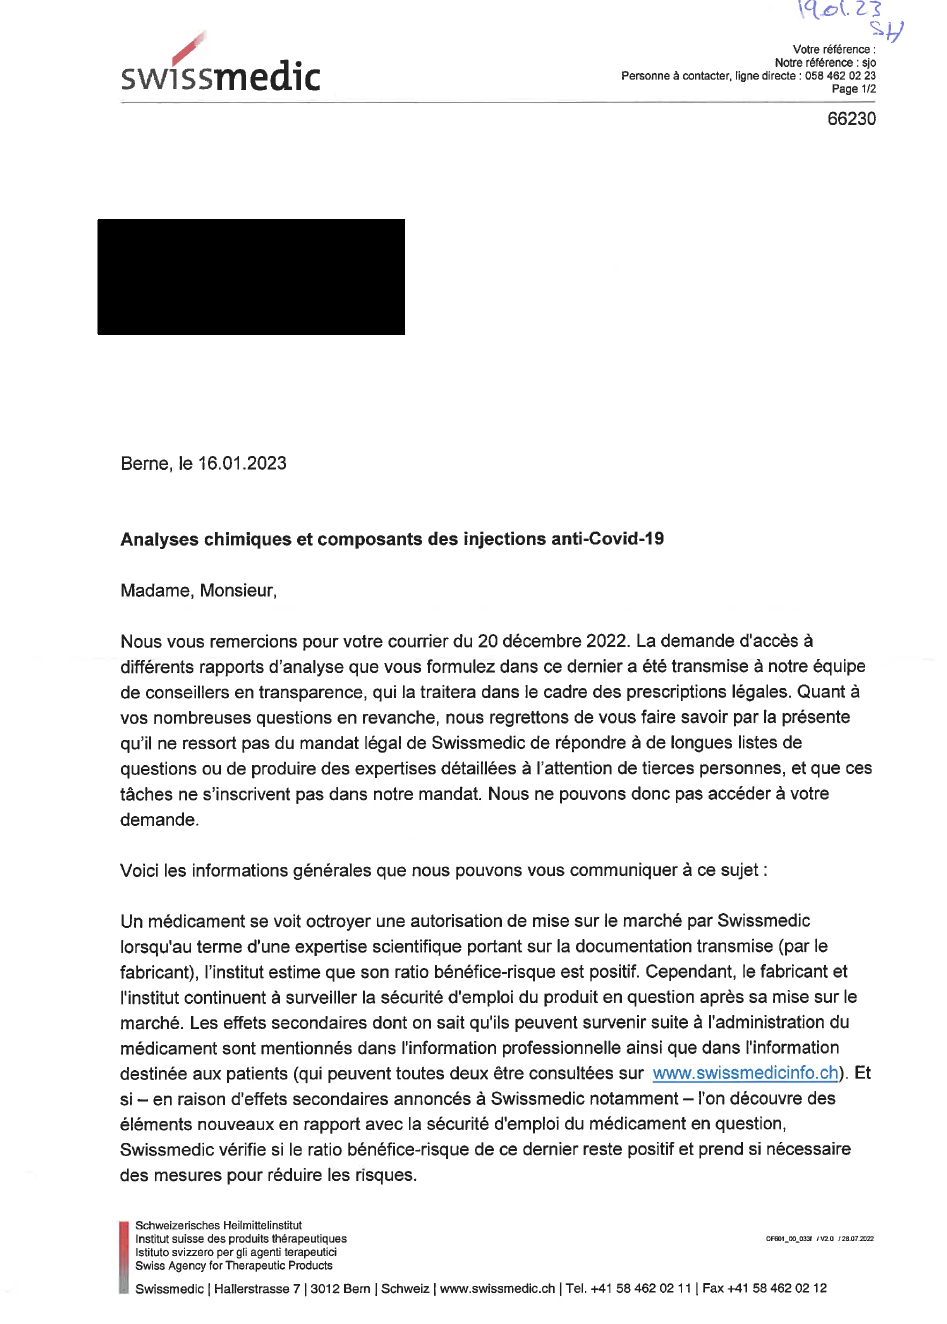 LETTRE RSSI-Avocat_2023-01-16_RESPONSE-2 Swissmedic composants injections_2023-01-16_Redacted COVER